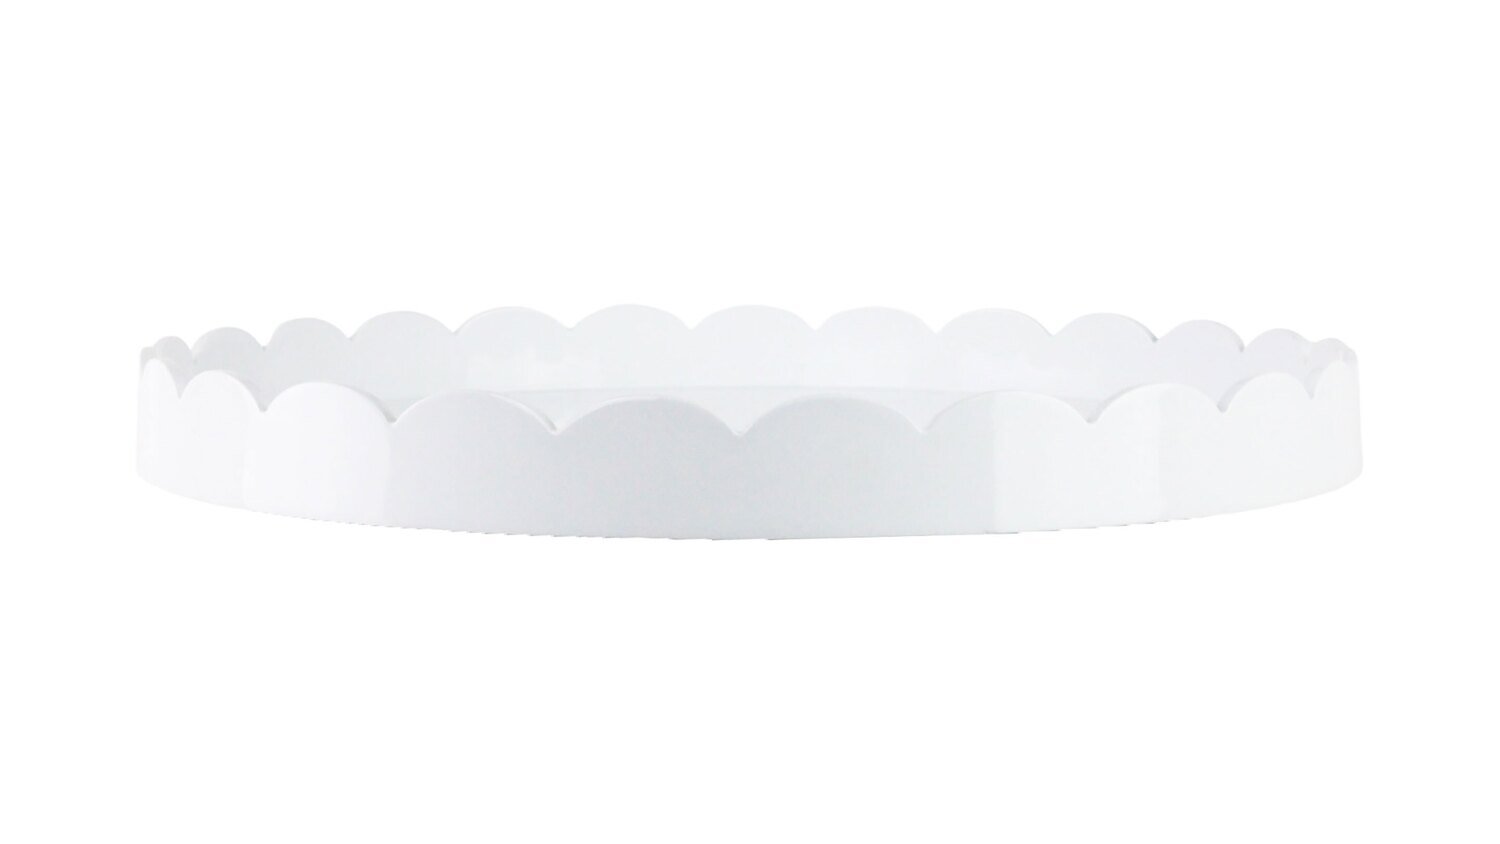 Addison Ross 20 x 20 Inch Scalloped Tray White Lacquer TR7300